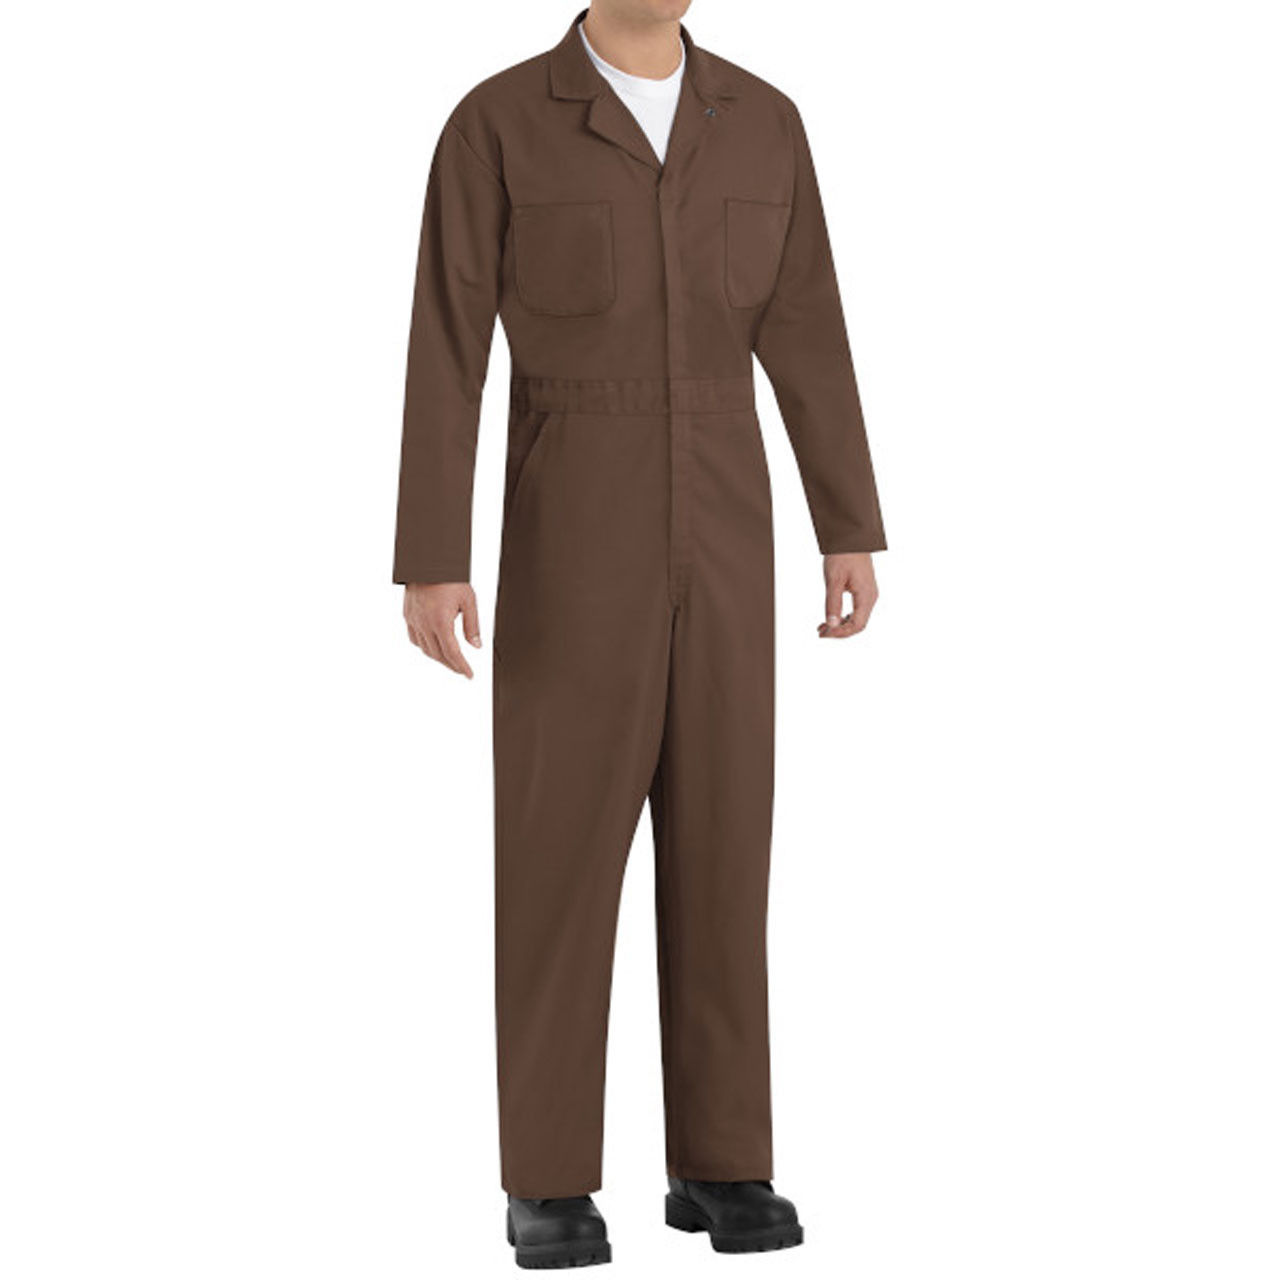 Does the brown coveralls have a zipper or button closure?